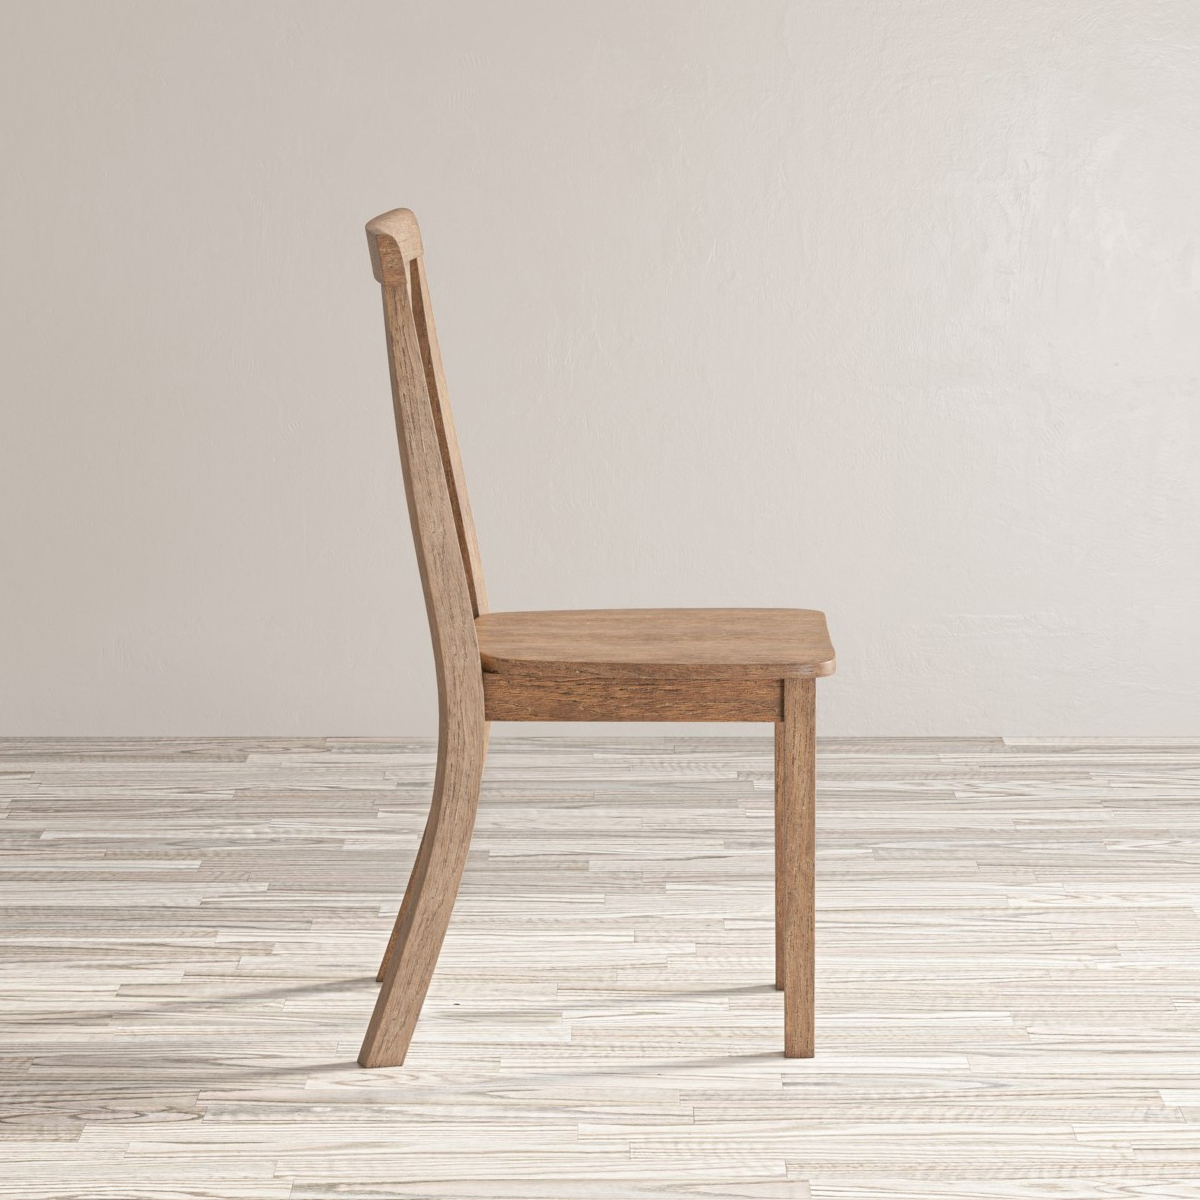 Picture of EASTERN TIDE XBACK CHAIR-NAT